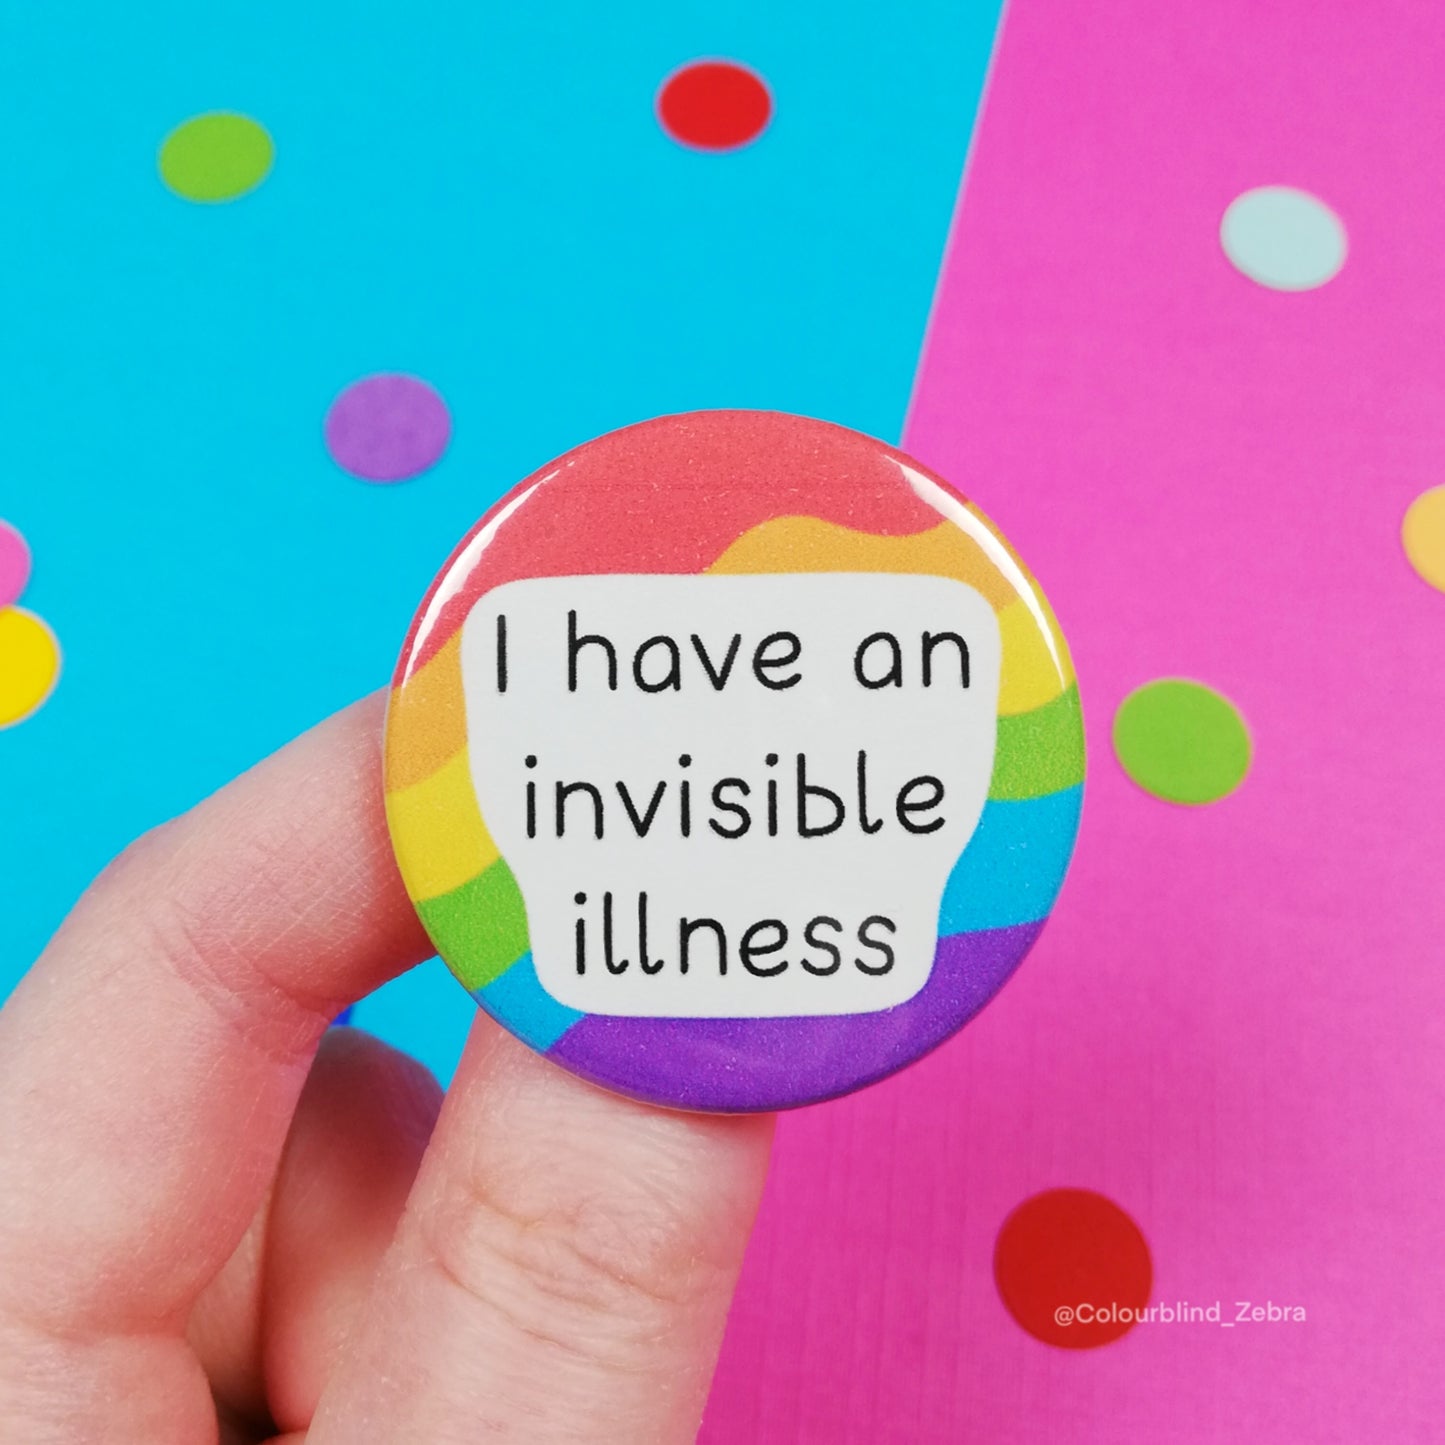 I Have an Invisible Illness Badge